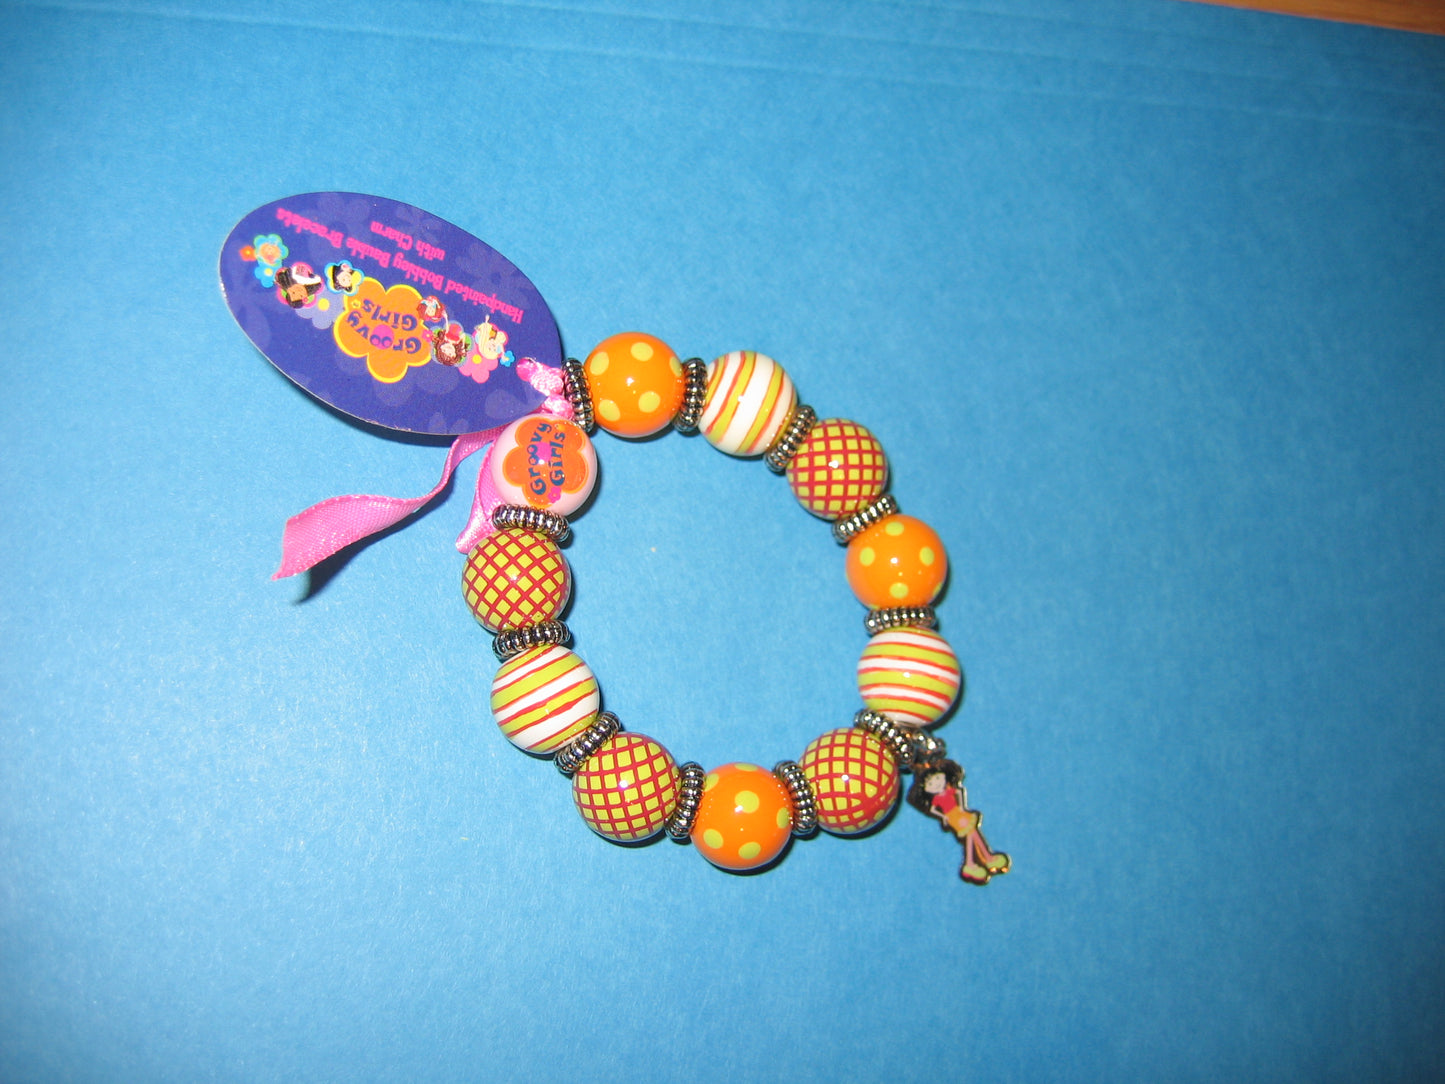 Bead Bracelet with Charm - Groovy Girls - Tomiko - Mint in Package Jewelry